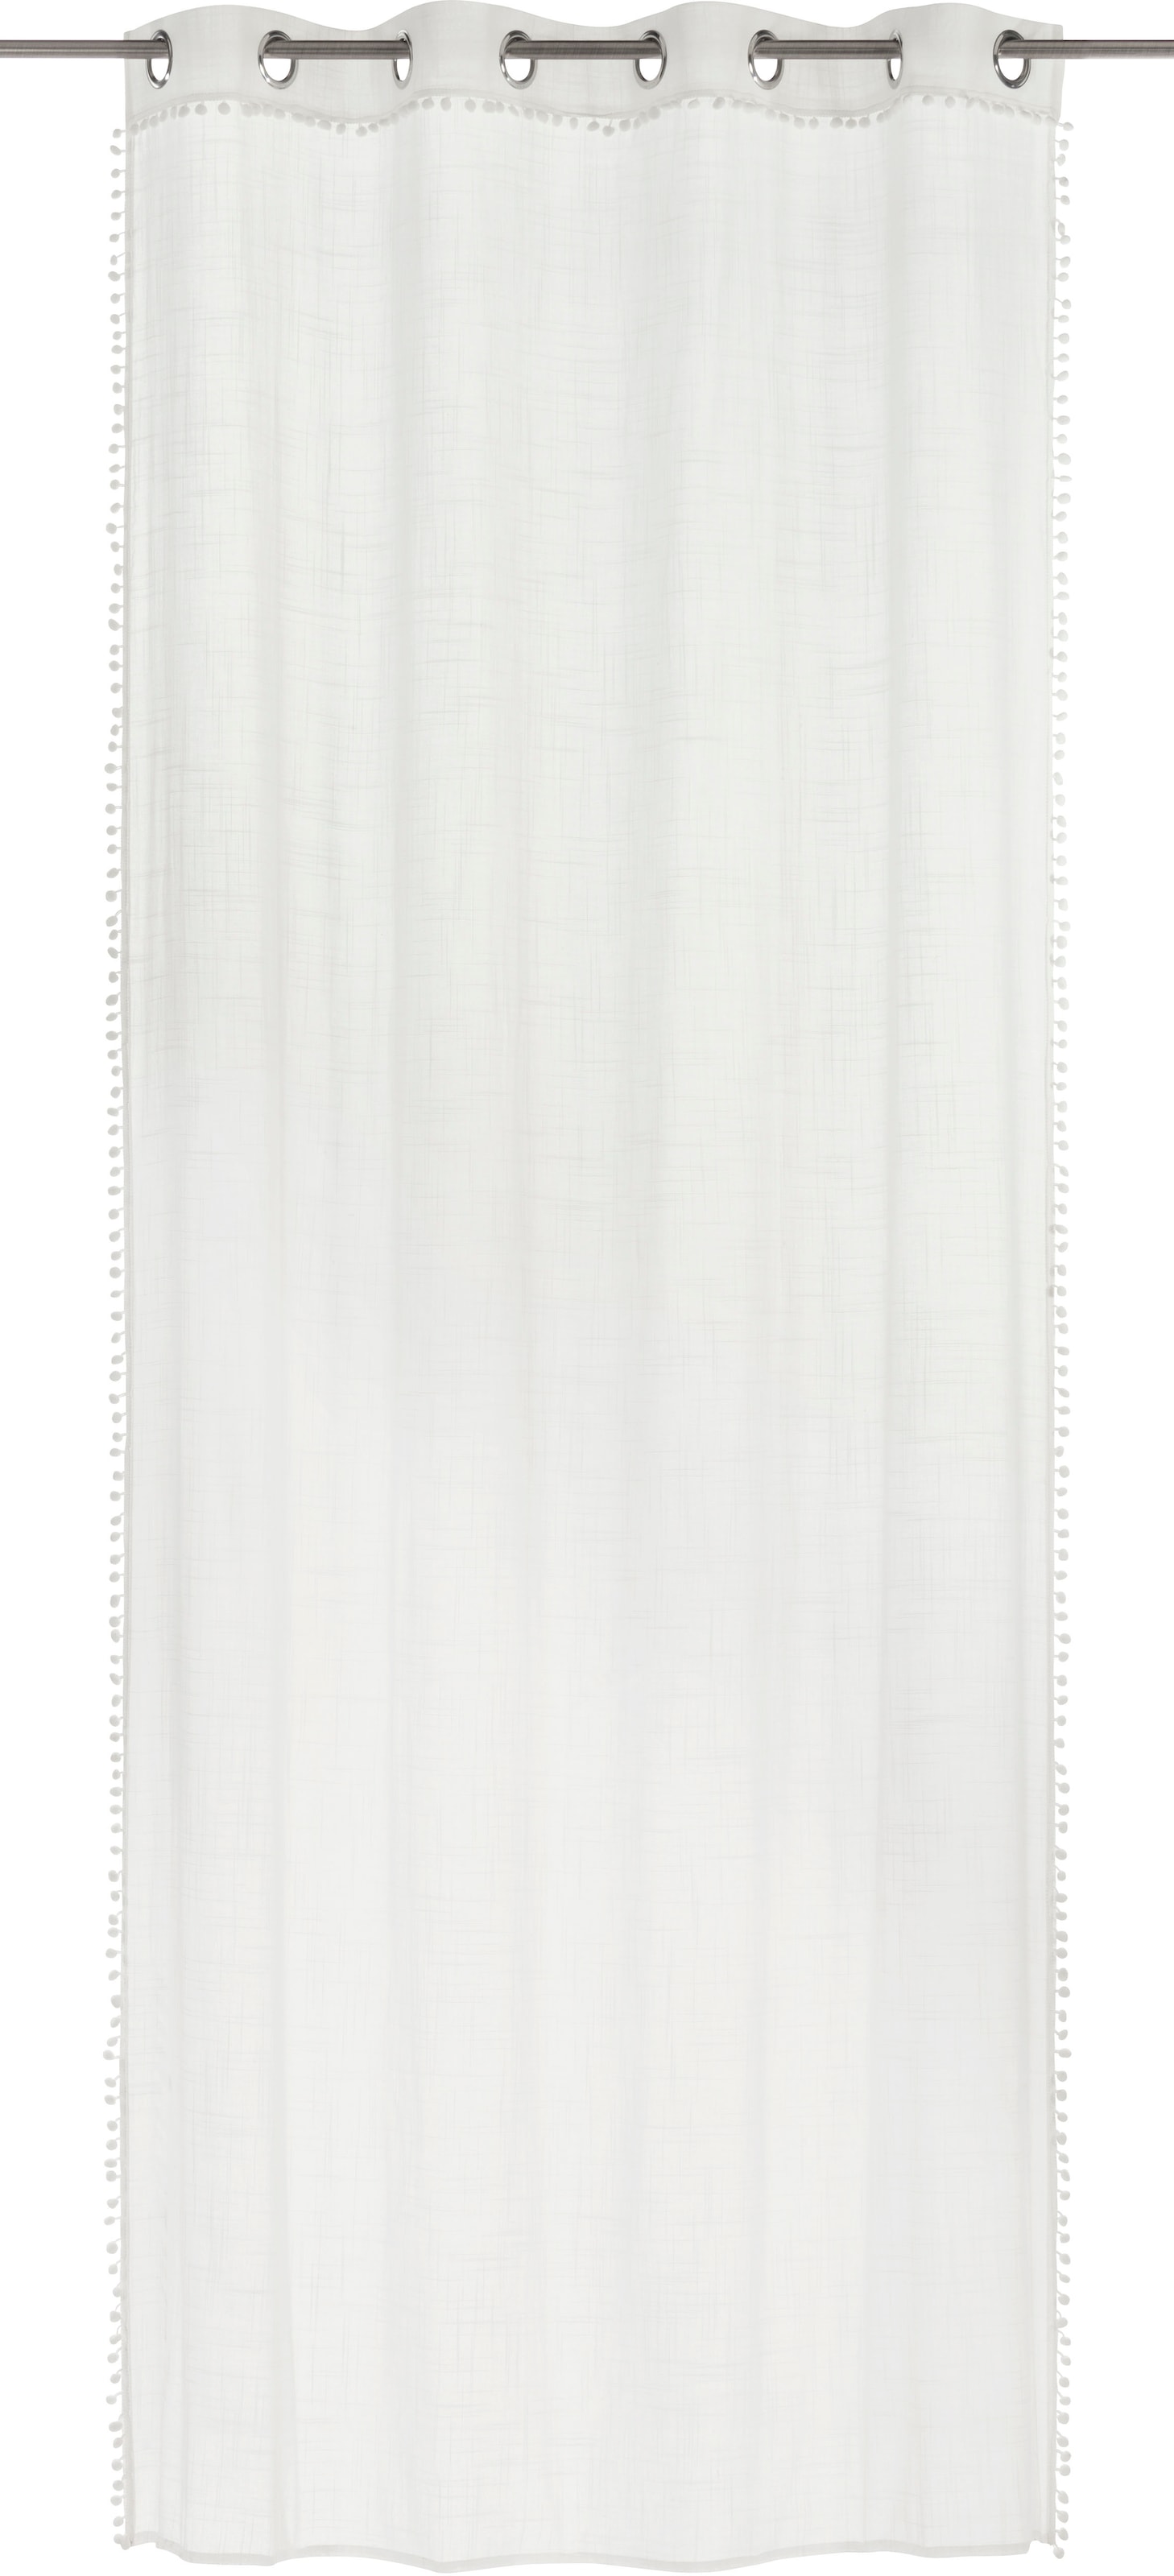 »Natural OTTO Home Collection offwhite«, freundin St.) Charme (1 Gardine bei 00